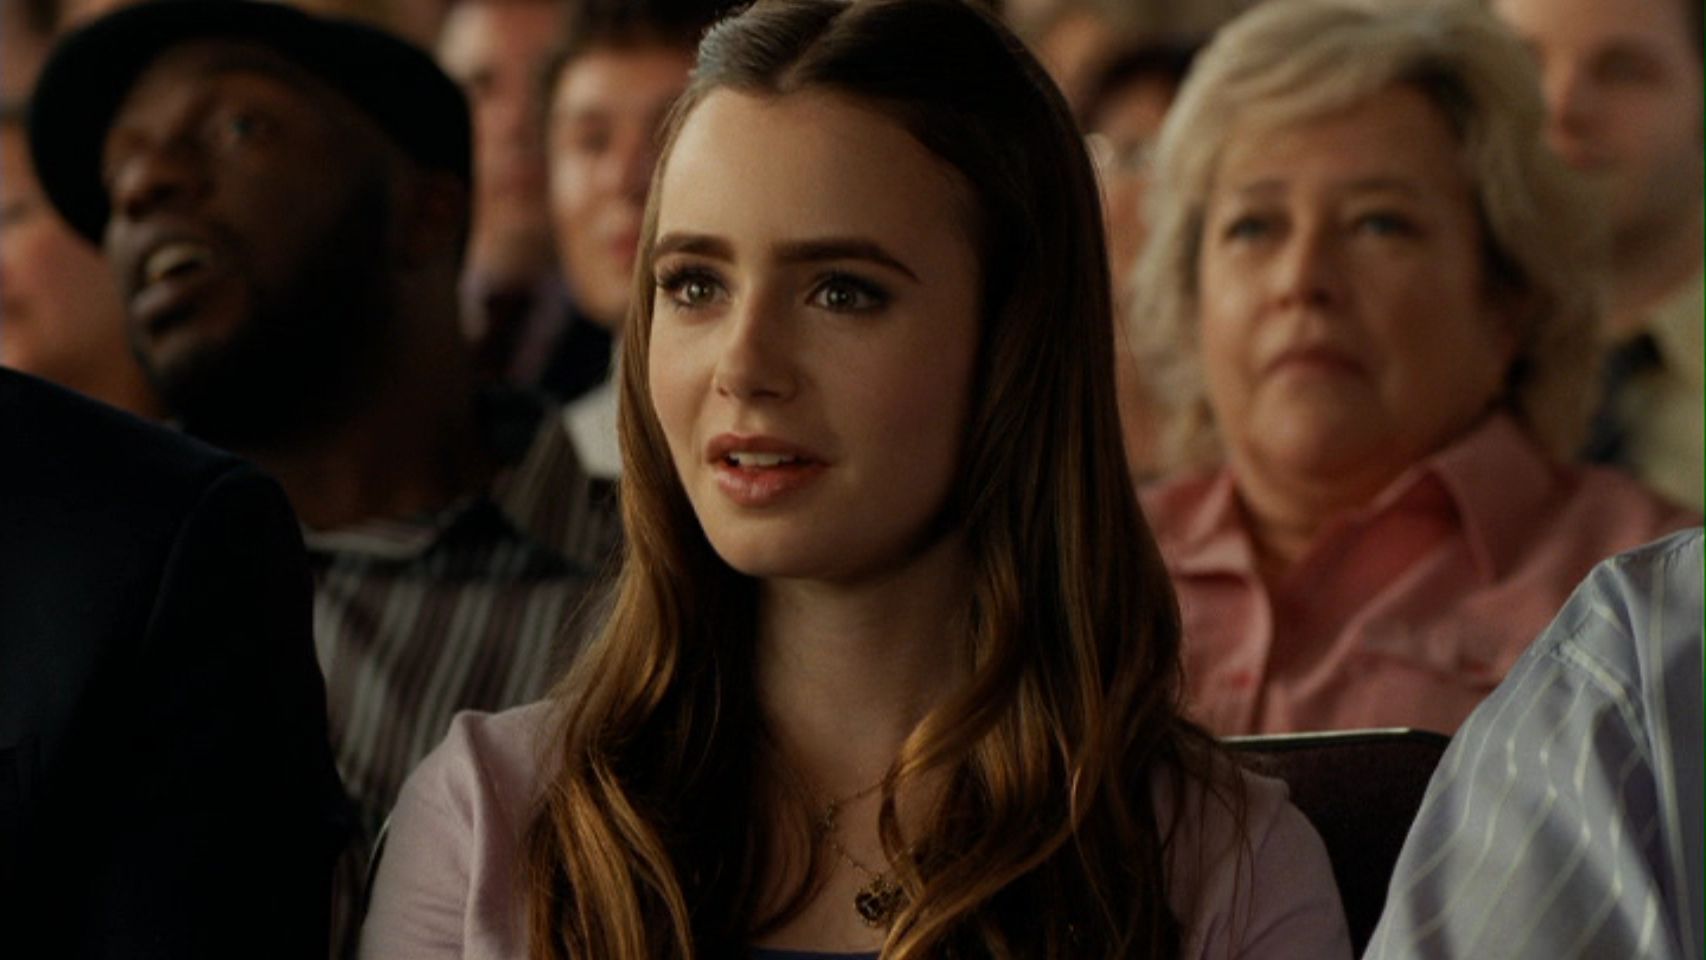 The Blind Side - Lily Collins Image (21307136) - Fanpop